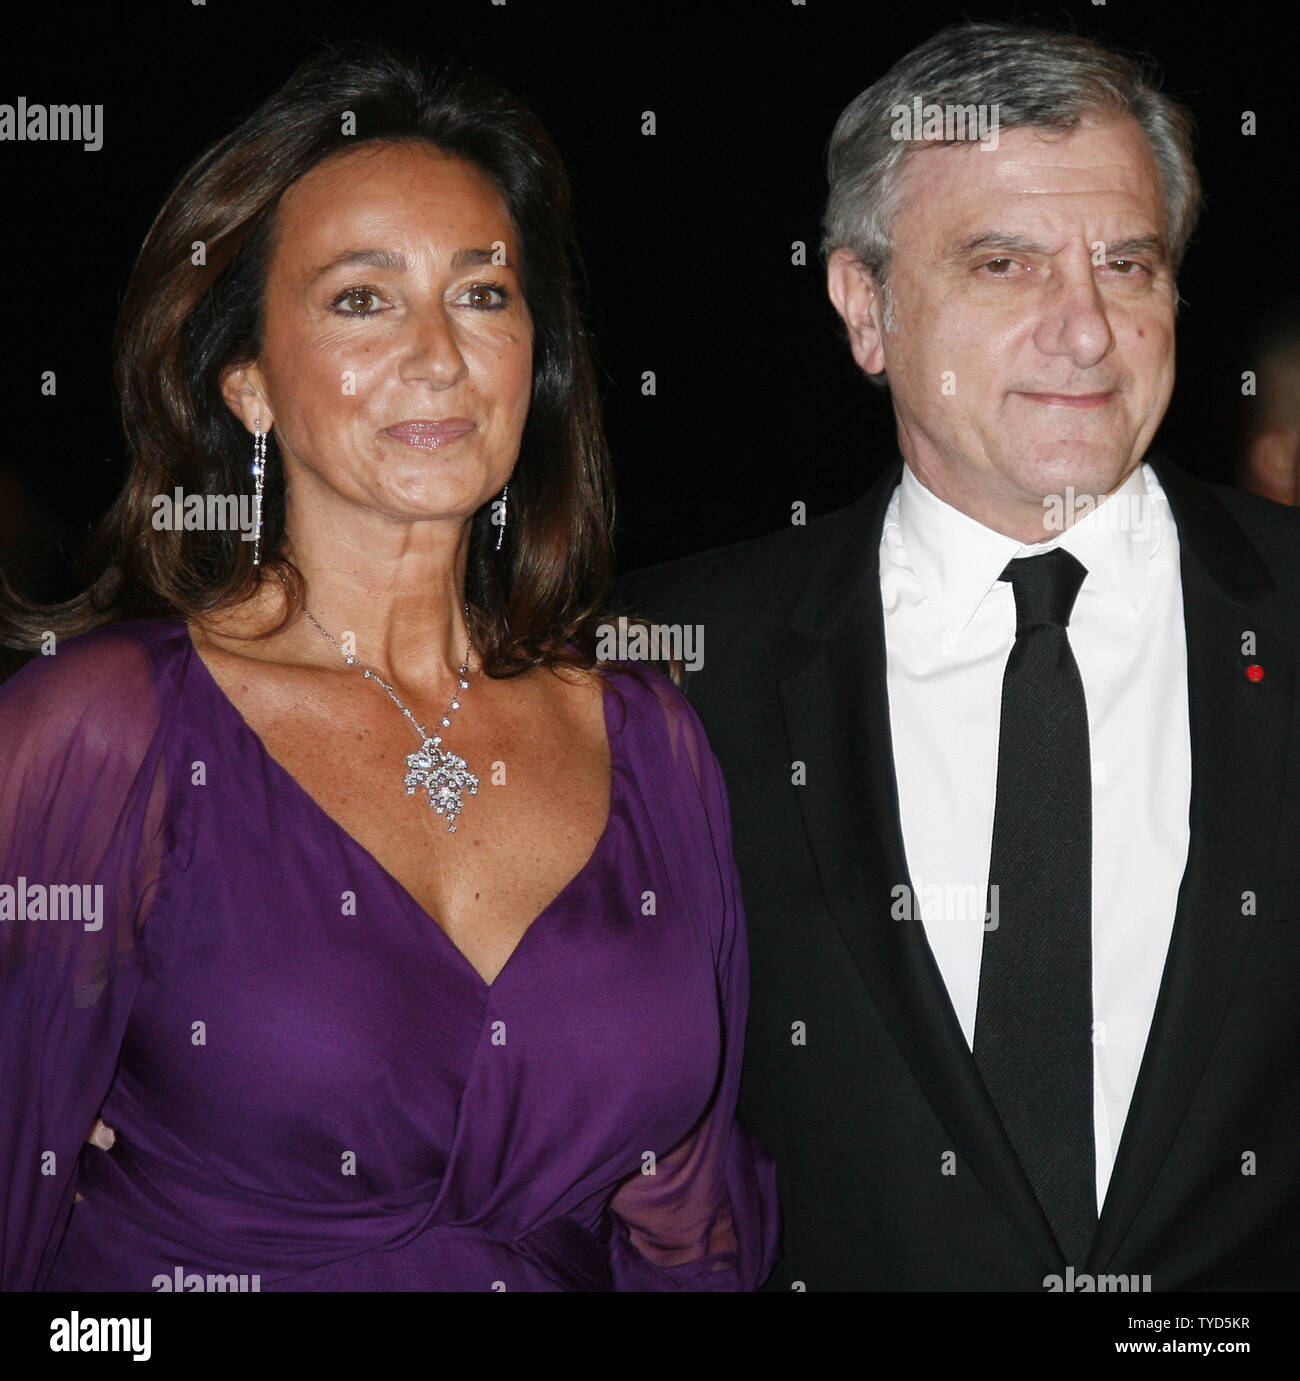 Sidney Toledano  BoF 500  The People Shaping the Global Fashion Industry